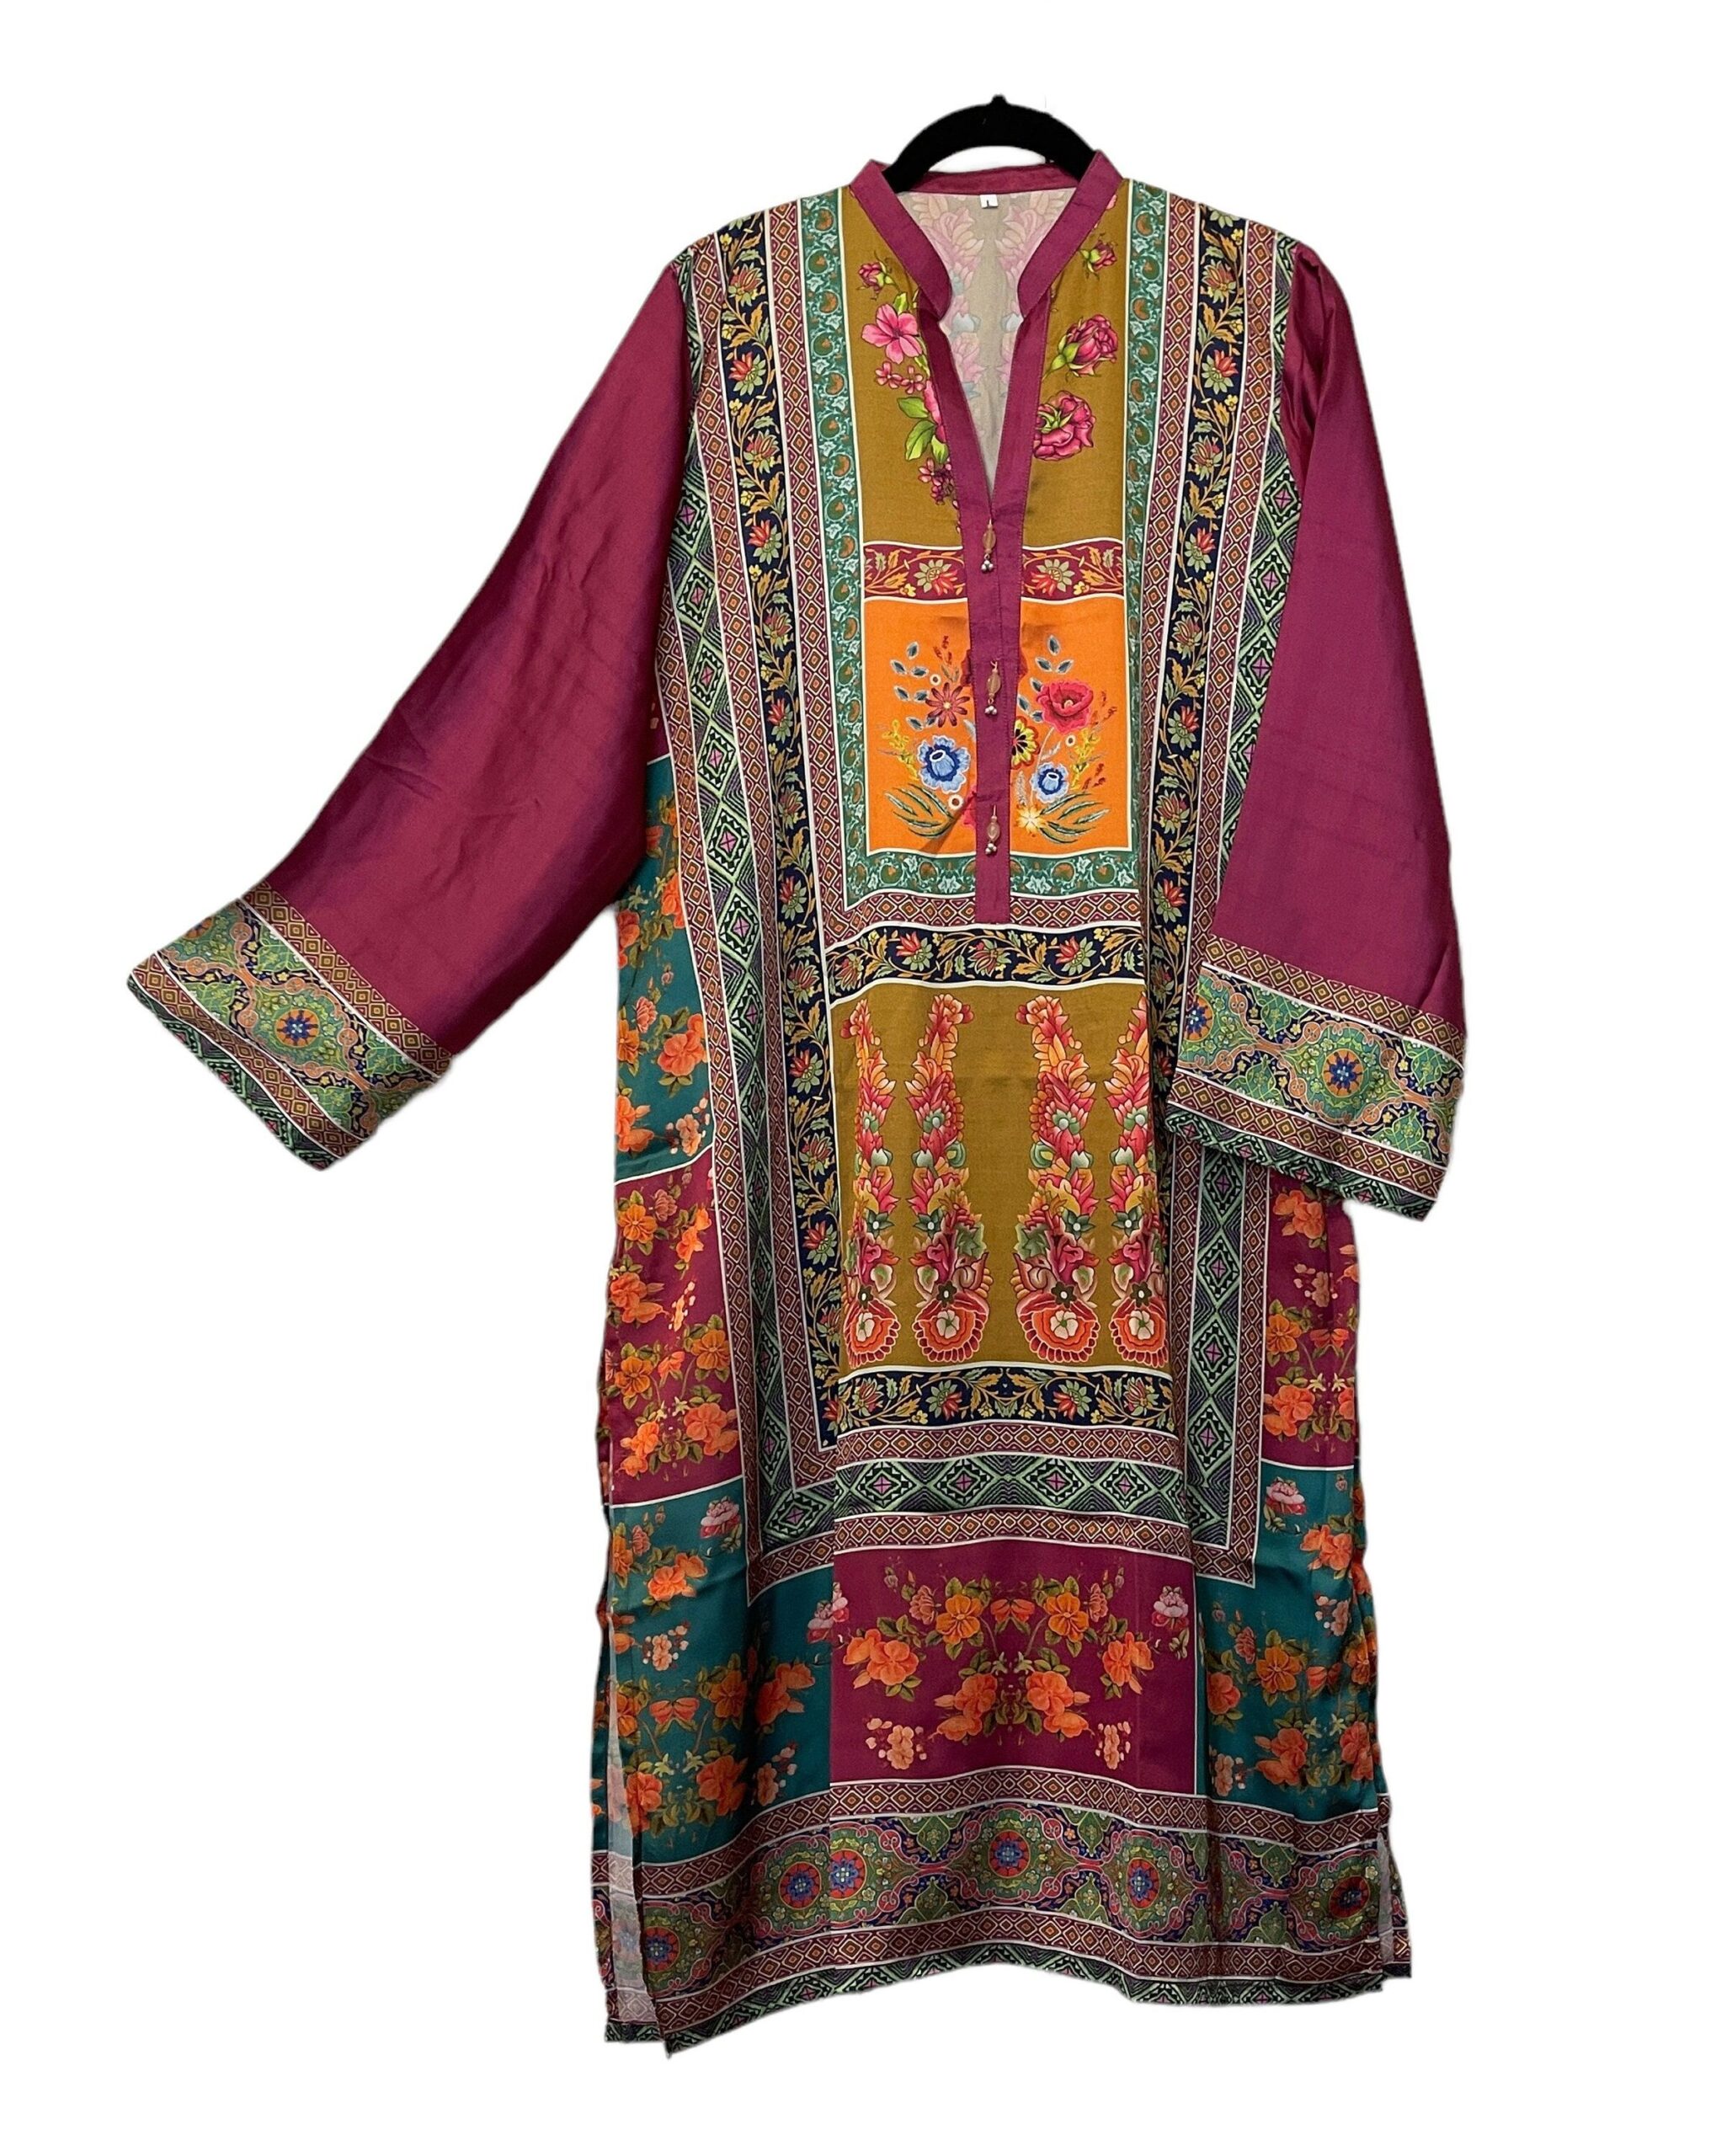 Kurti Tunic: Effortless Ethnic Chic for Every Day